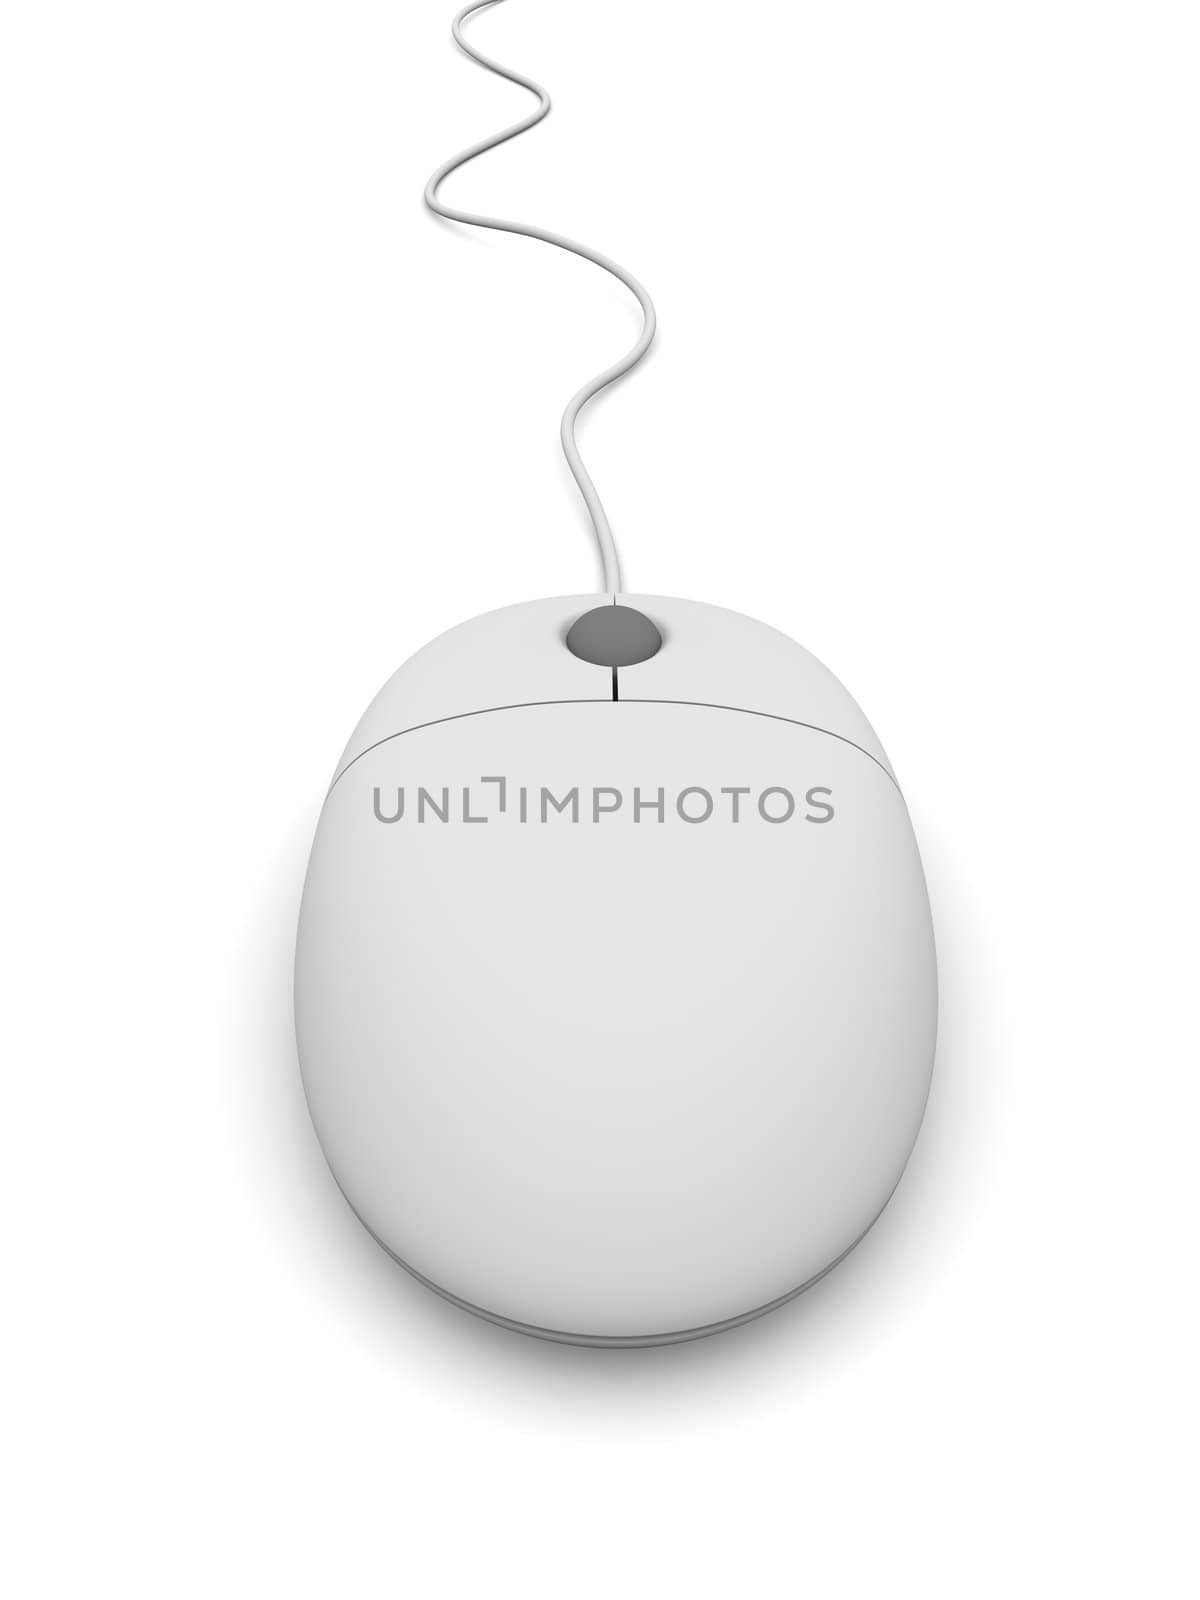 Illustration of simple white wired computer mouse isolated on white background